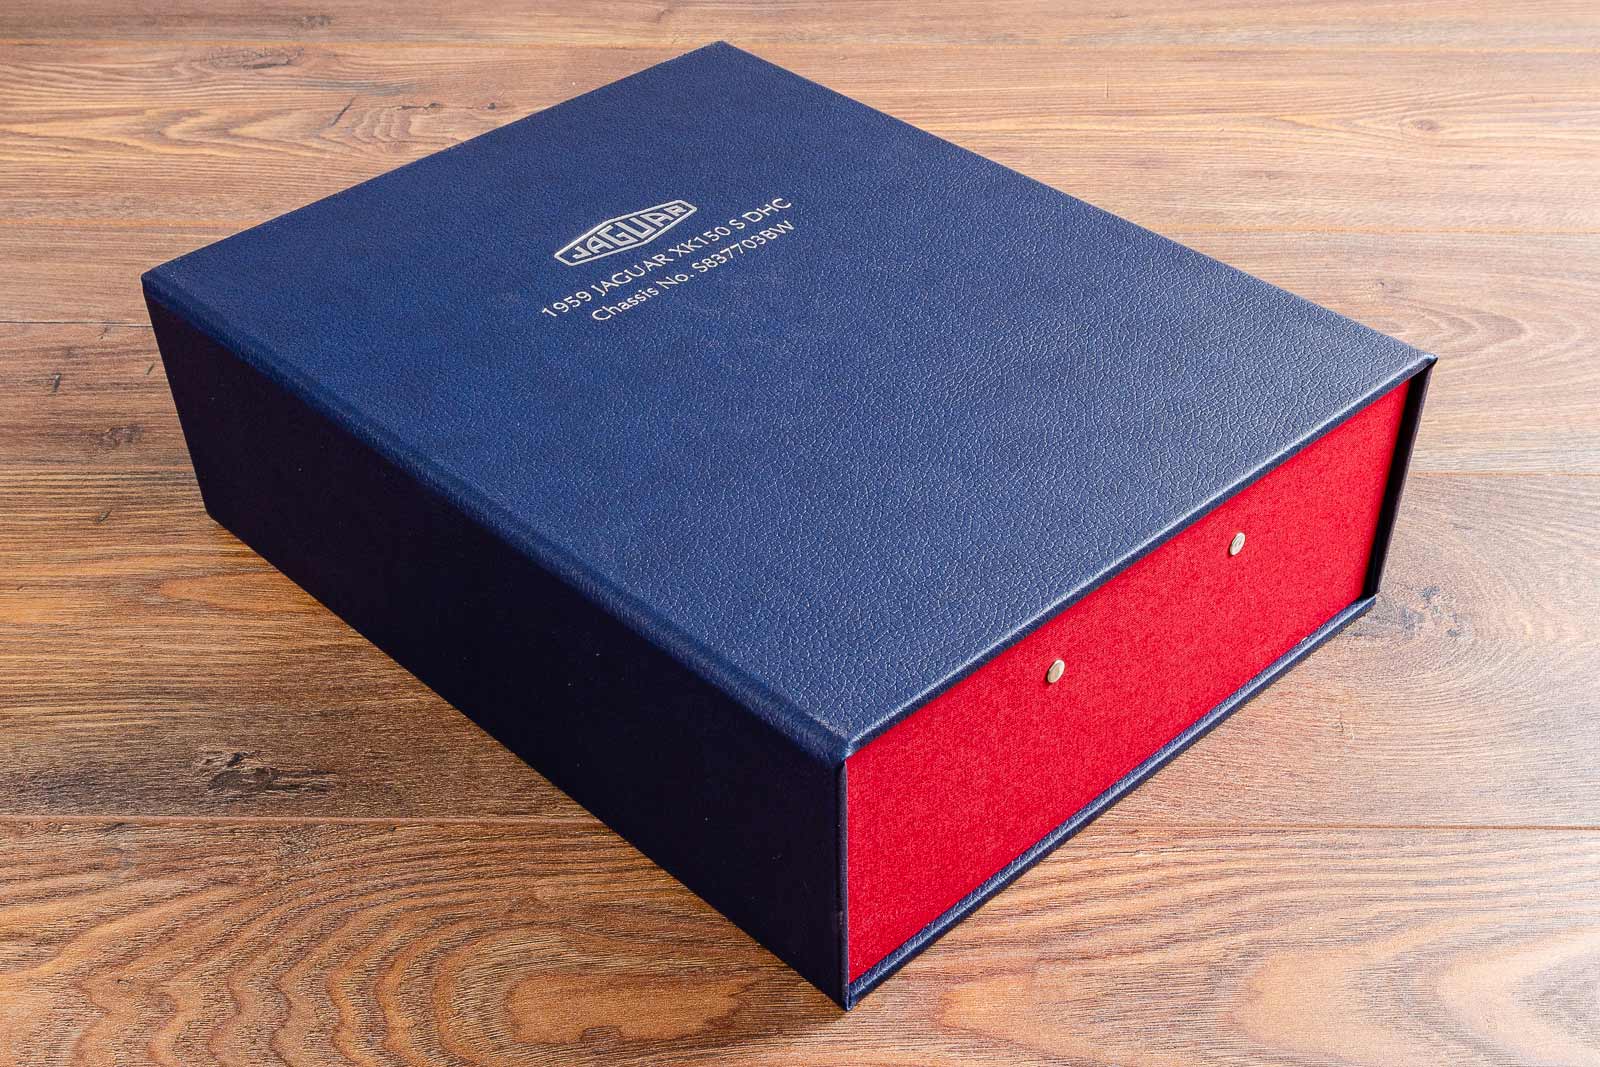 8.5x11 luxury hand made box file in red book cloth and blue faux leather individually hand made by hartnack and company